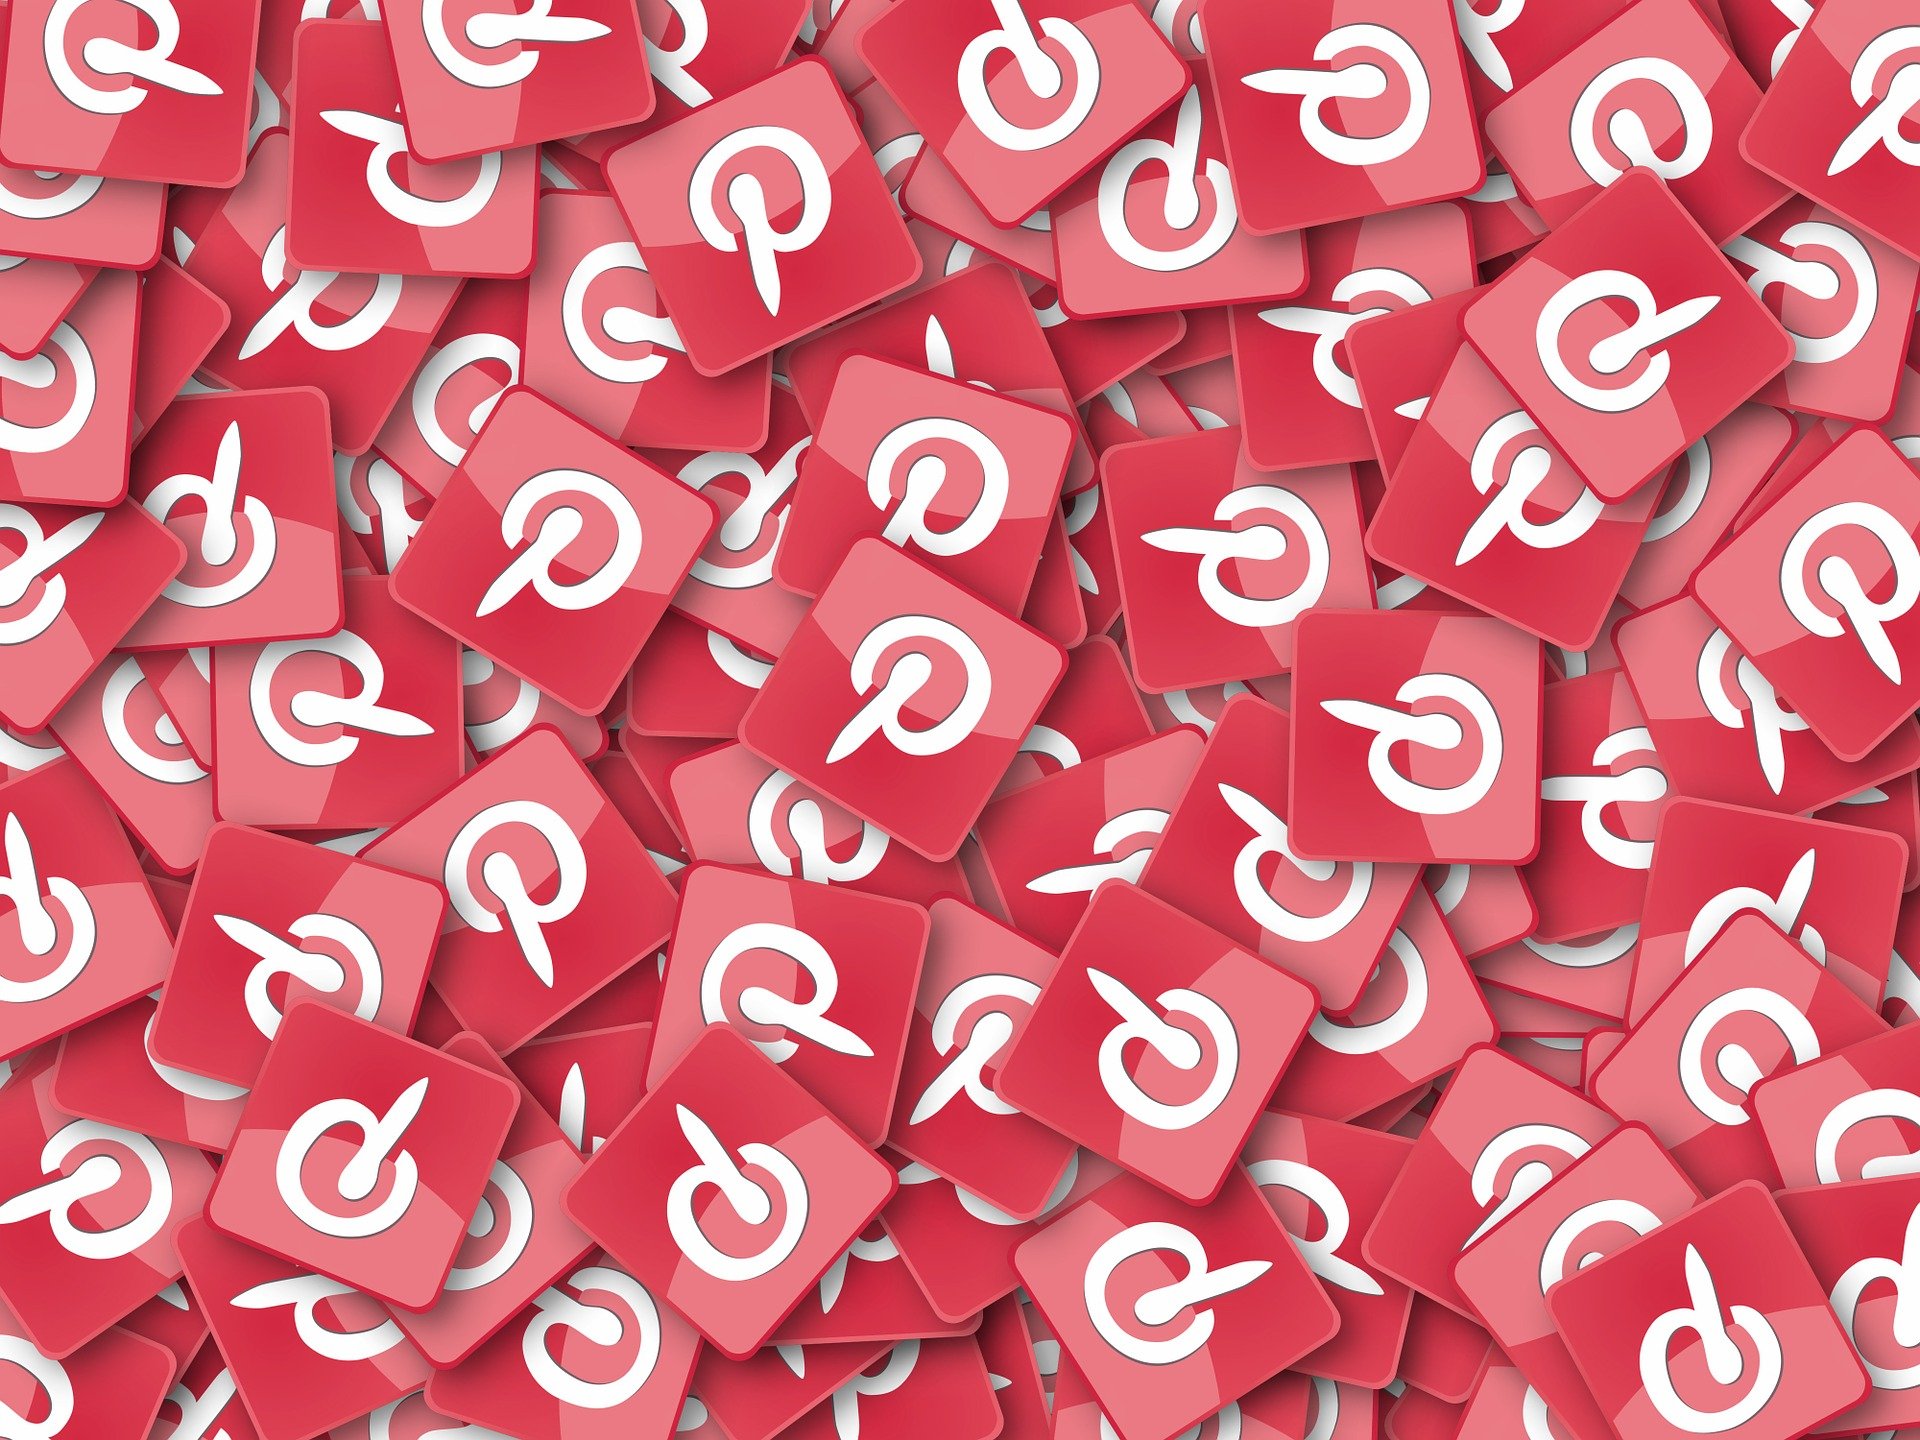 All inclusive guide to Pinterest Marketing